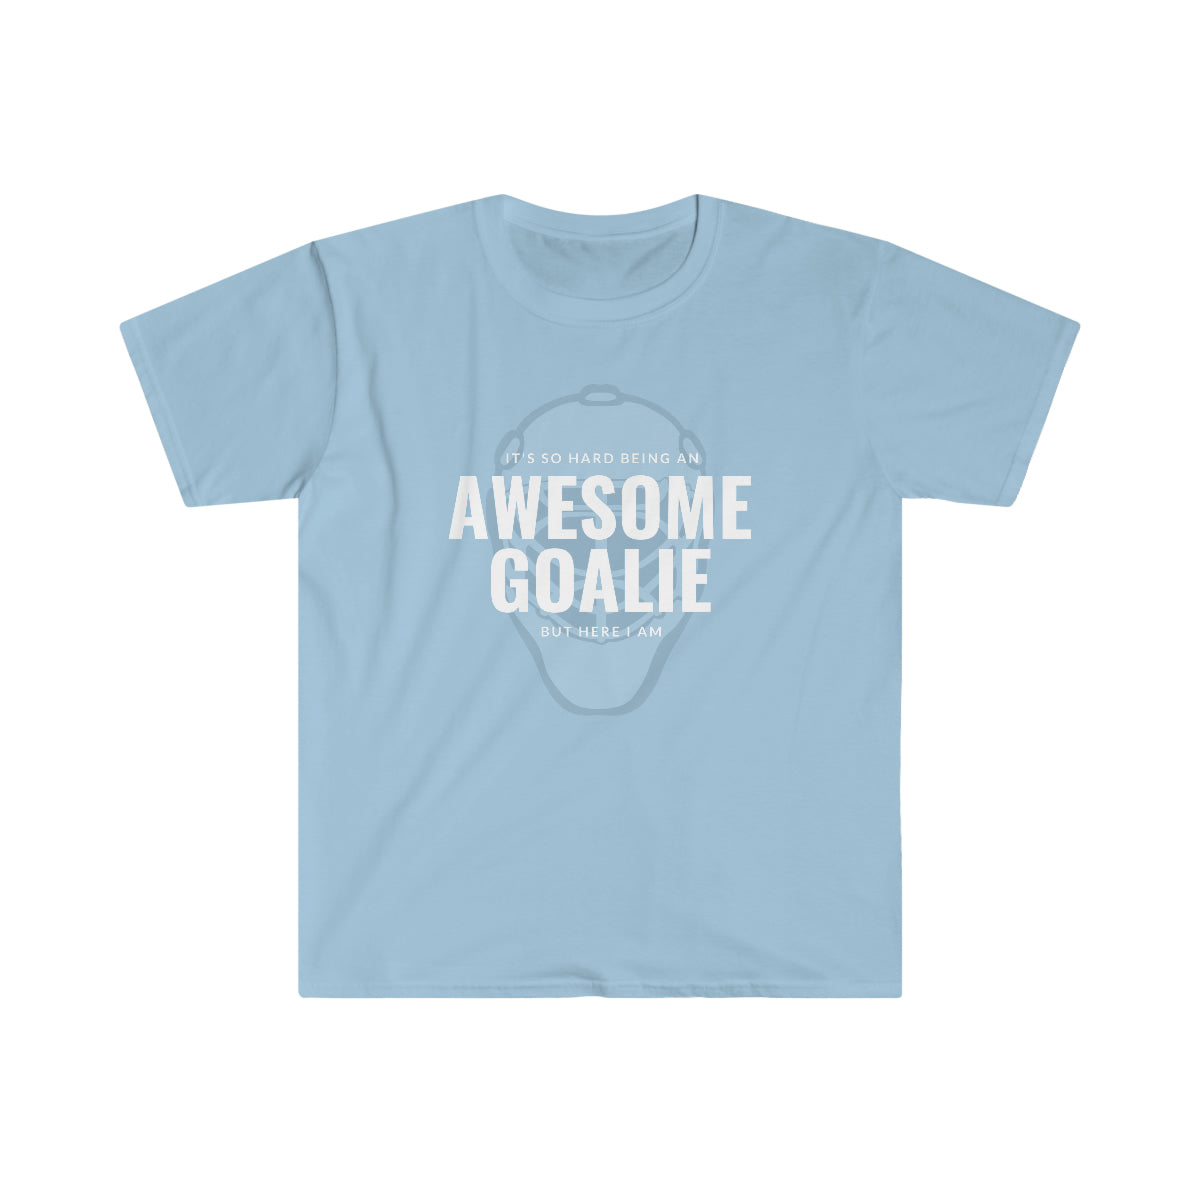 It's hard being an AWESOME GOALIE, but here I am - Men's Tee